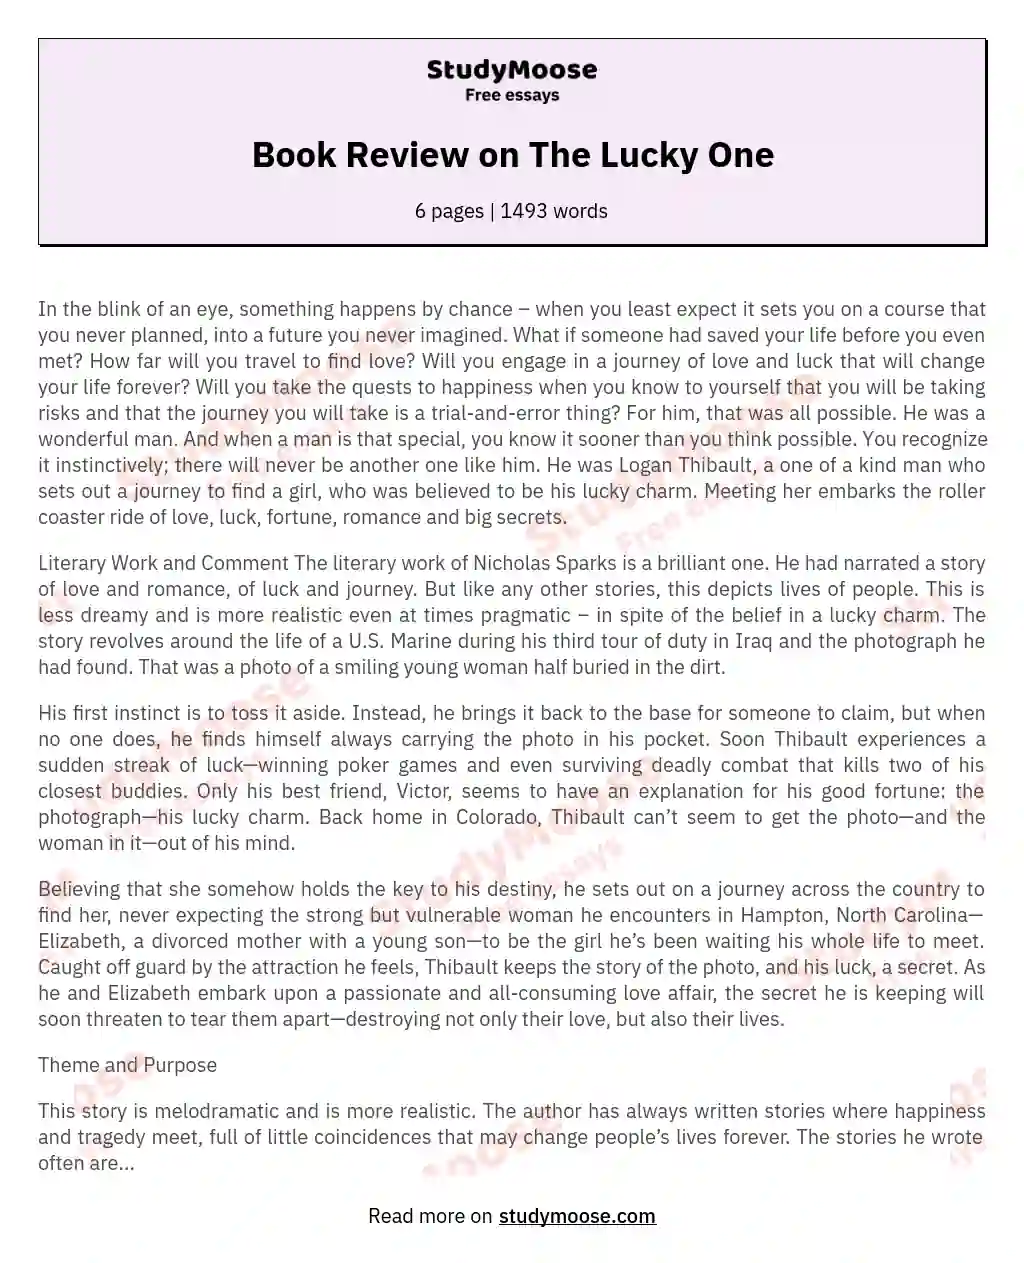 Book Review on The Lucky One essay